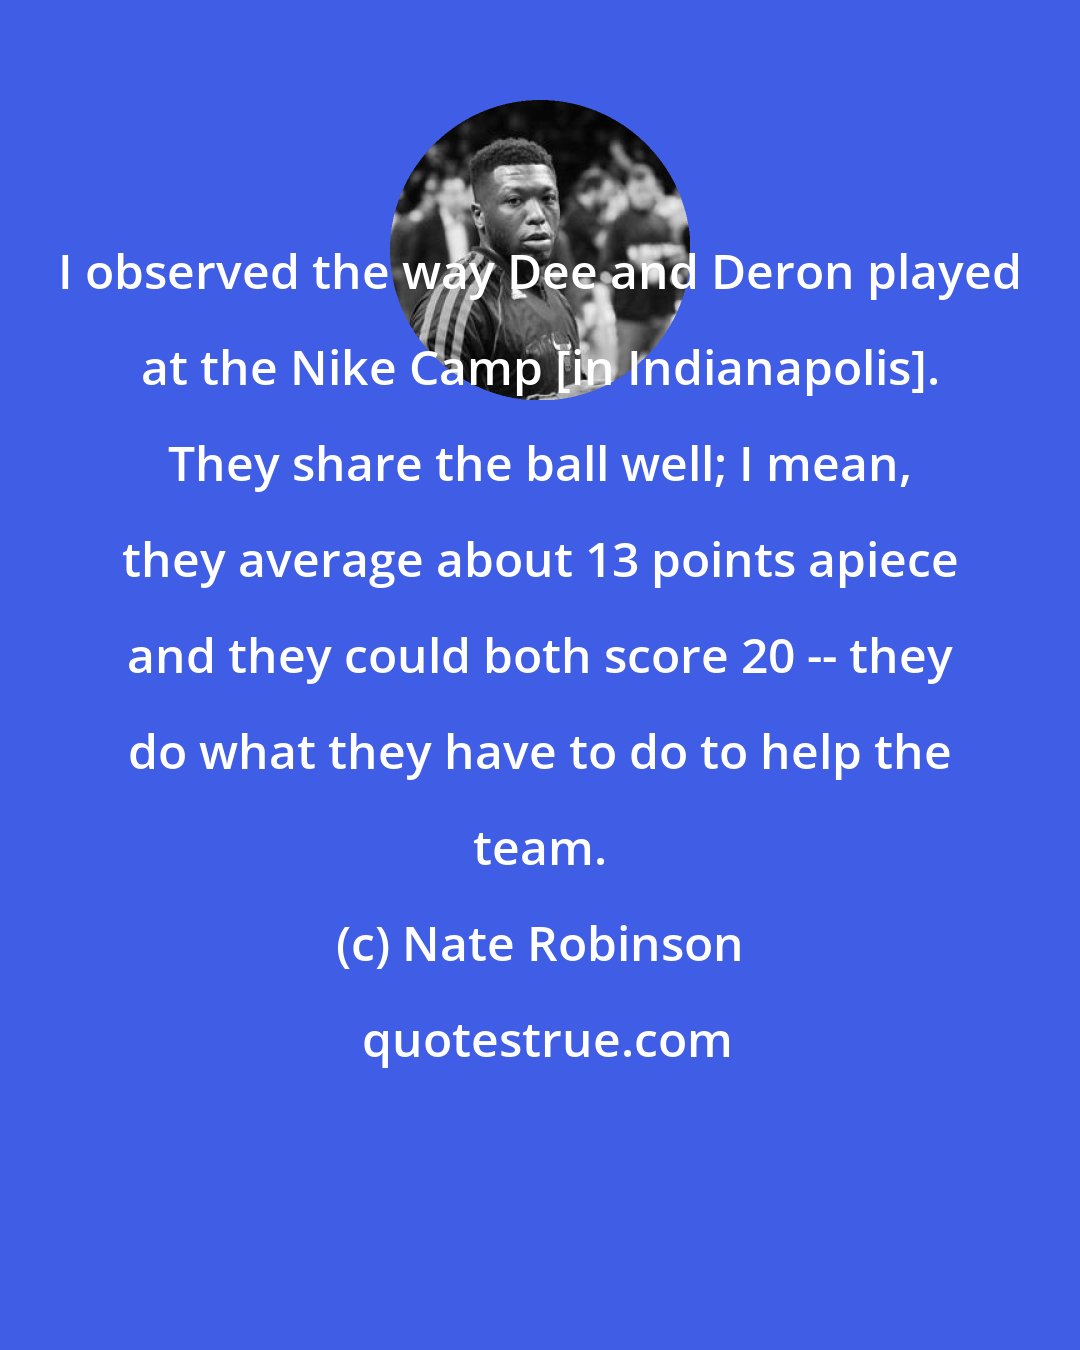 Nate Robinson: I observed the way Dee and Deron played at the Nike Camp [in Indianapolis]. They share the ball well; I mean, they average about 13 points apiece and they could both score 20 -- they do what they have to do to help the team.